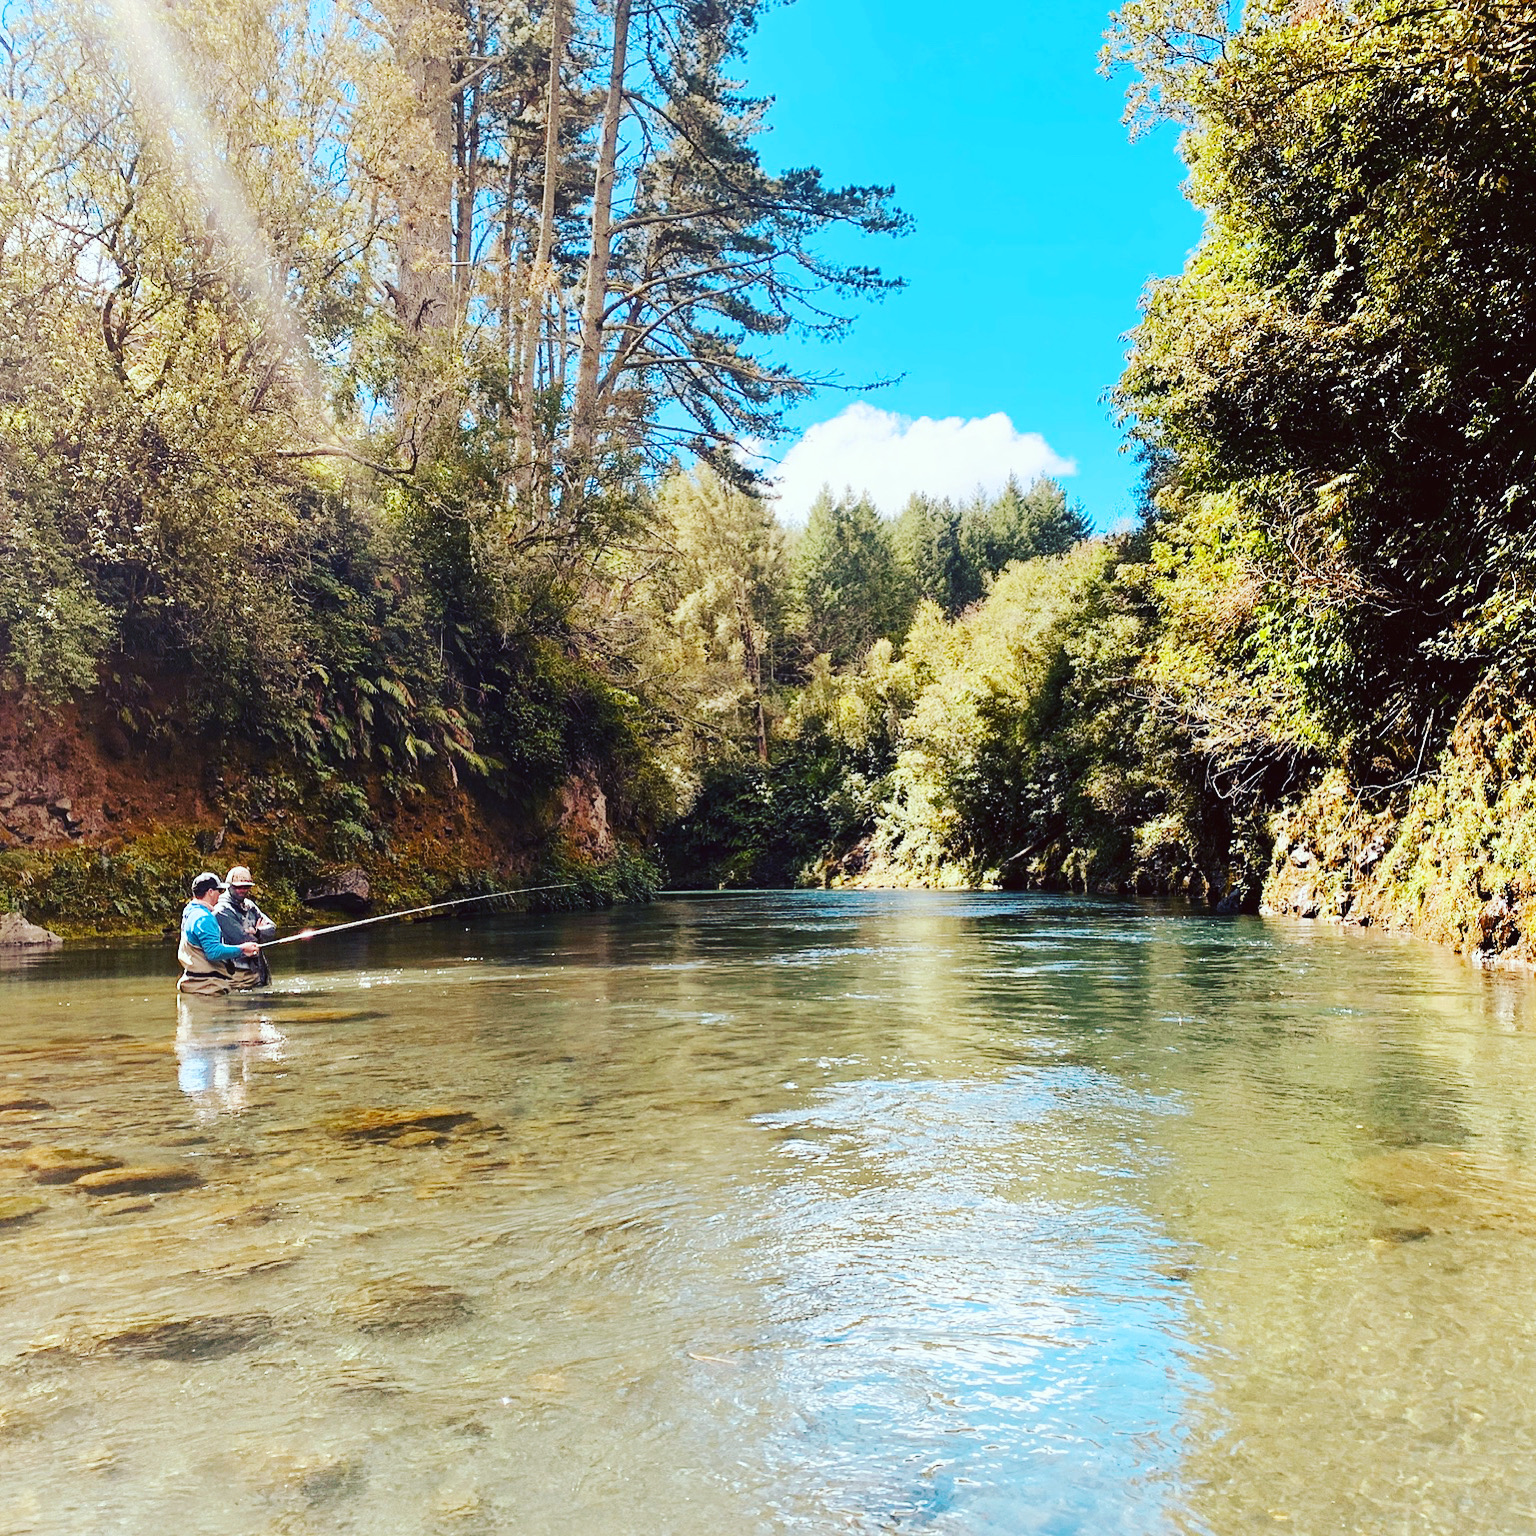 Chris Jolly Outdoors knows all the best spots for fly fishing in Taupo. Our trout fishing charters are perfect for anglers of all levels of experience.